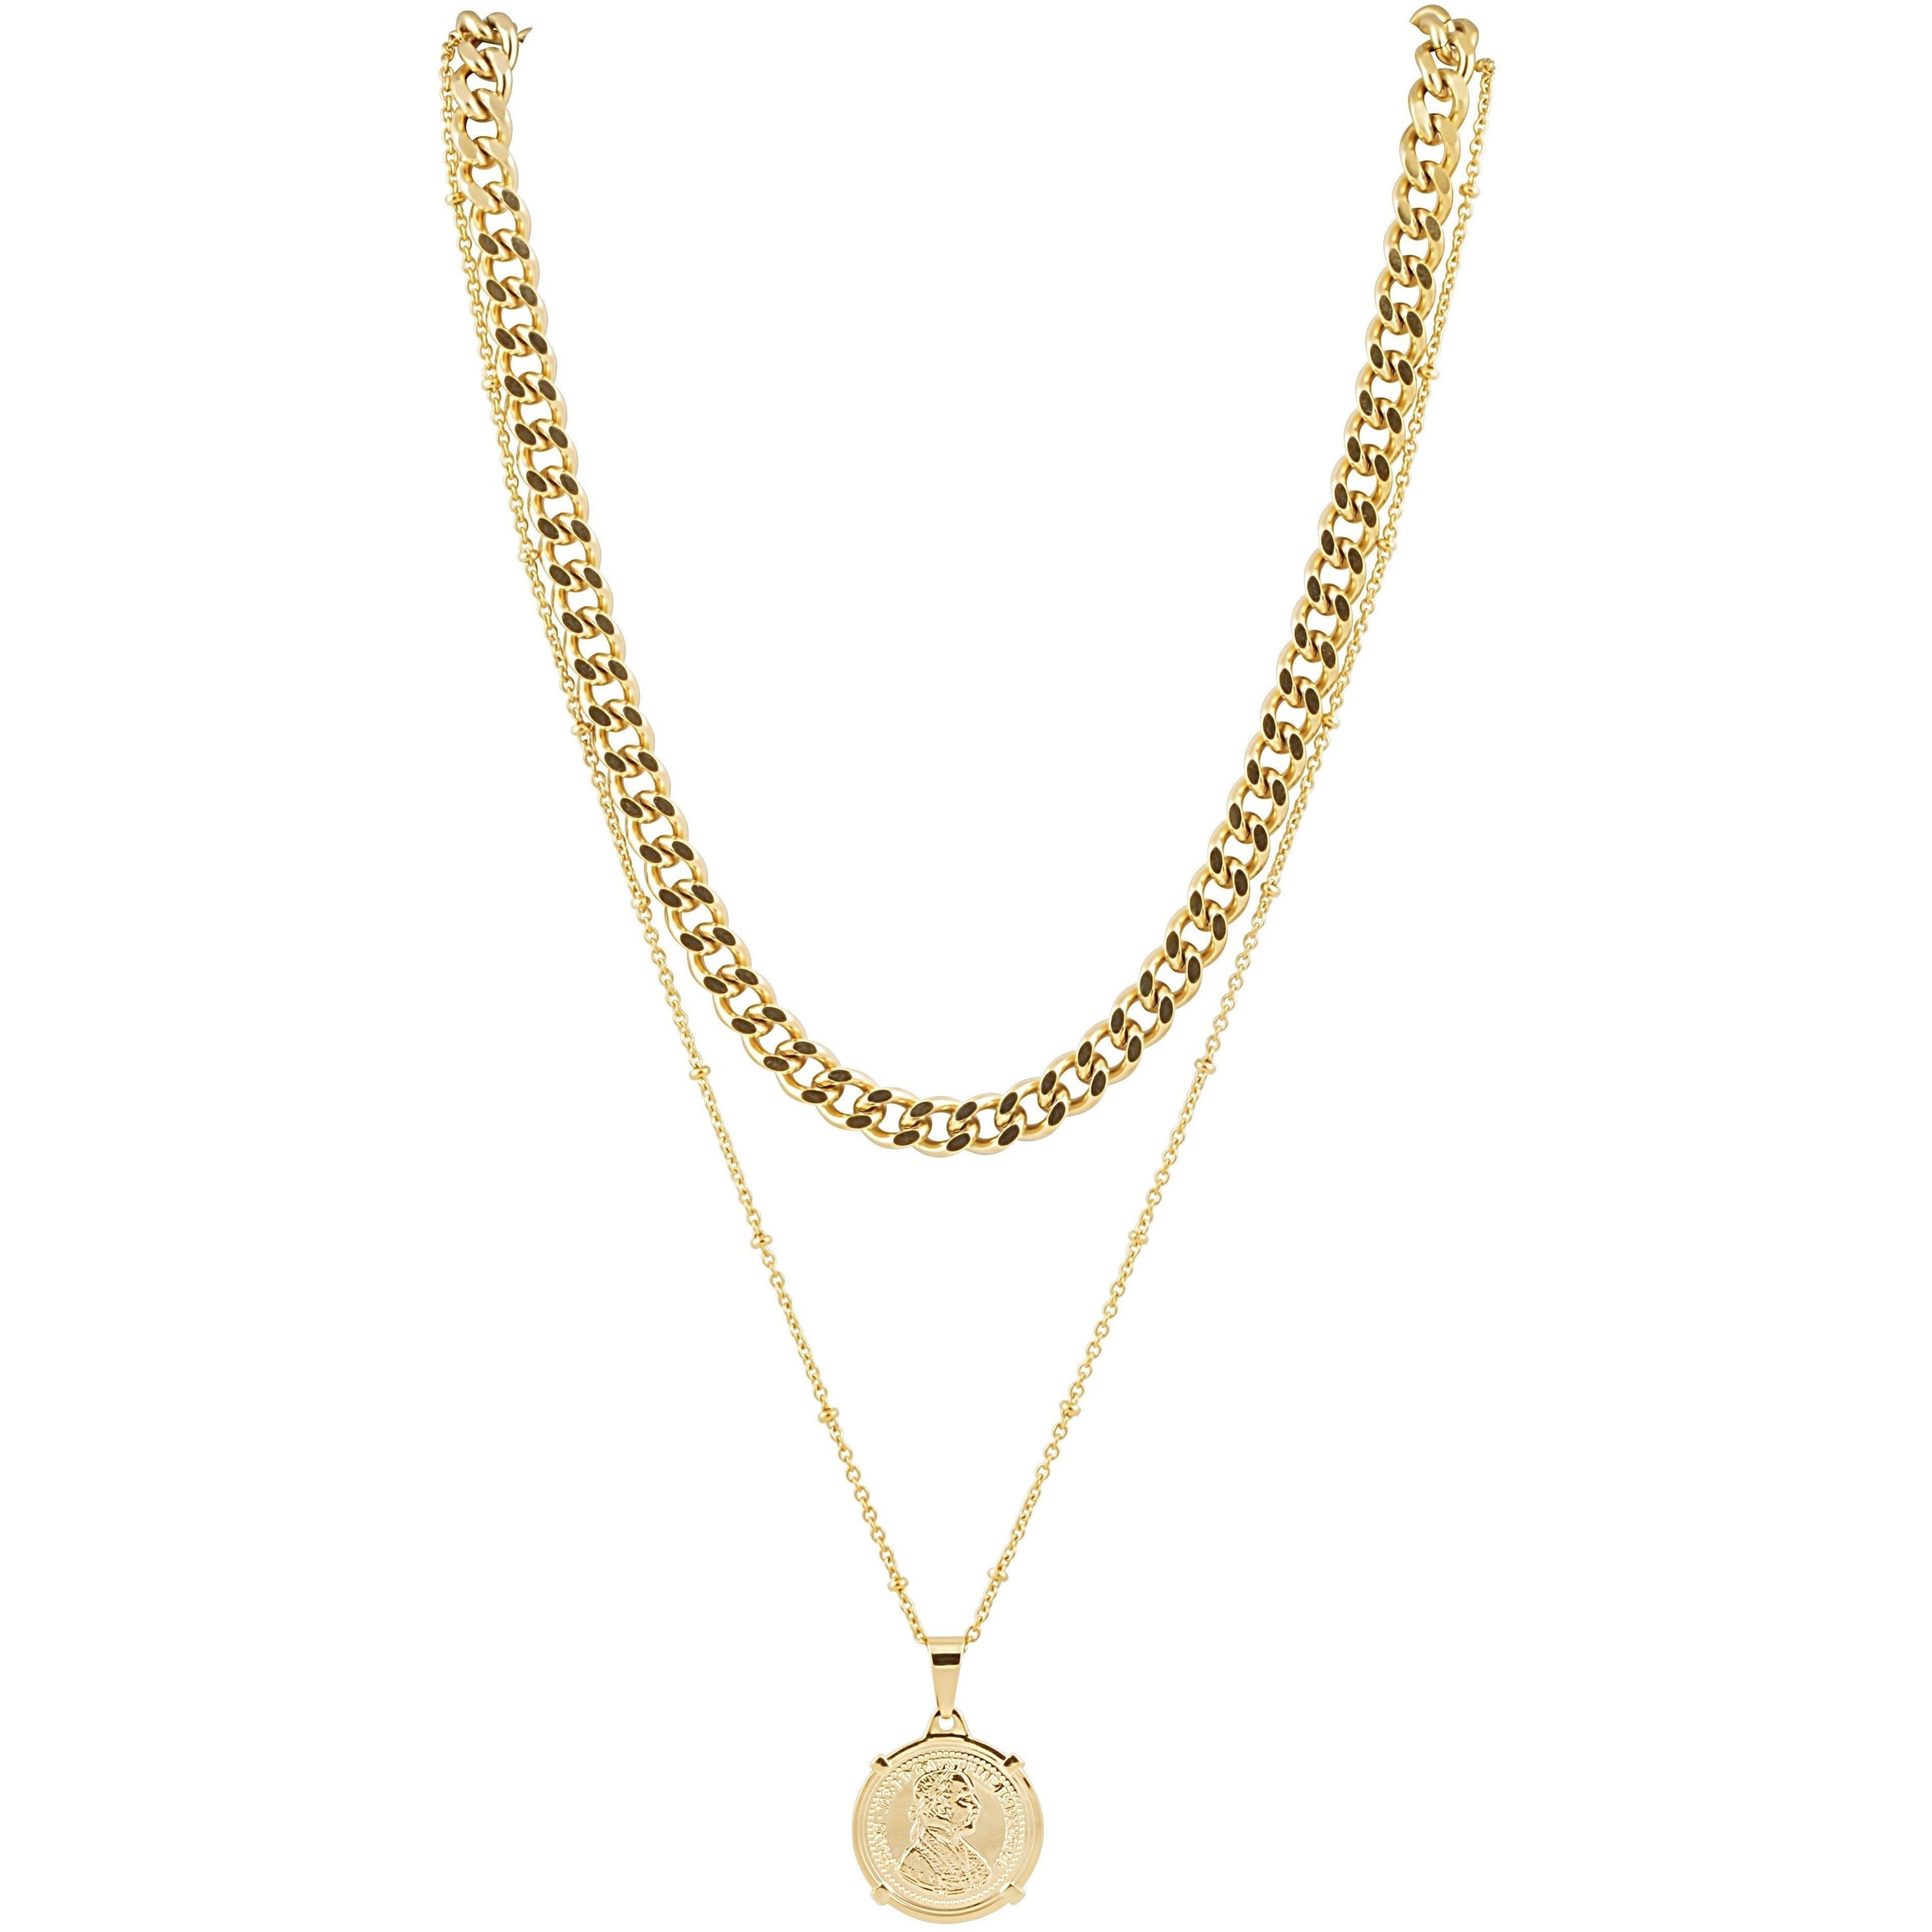 Gold Plated Cuban Link Coin Necklace - Hypoallergenic & Tarnish Resistant, 15"-20" Length with 2" Extender Bijou Her